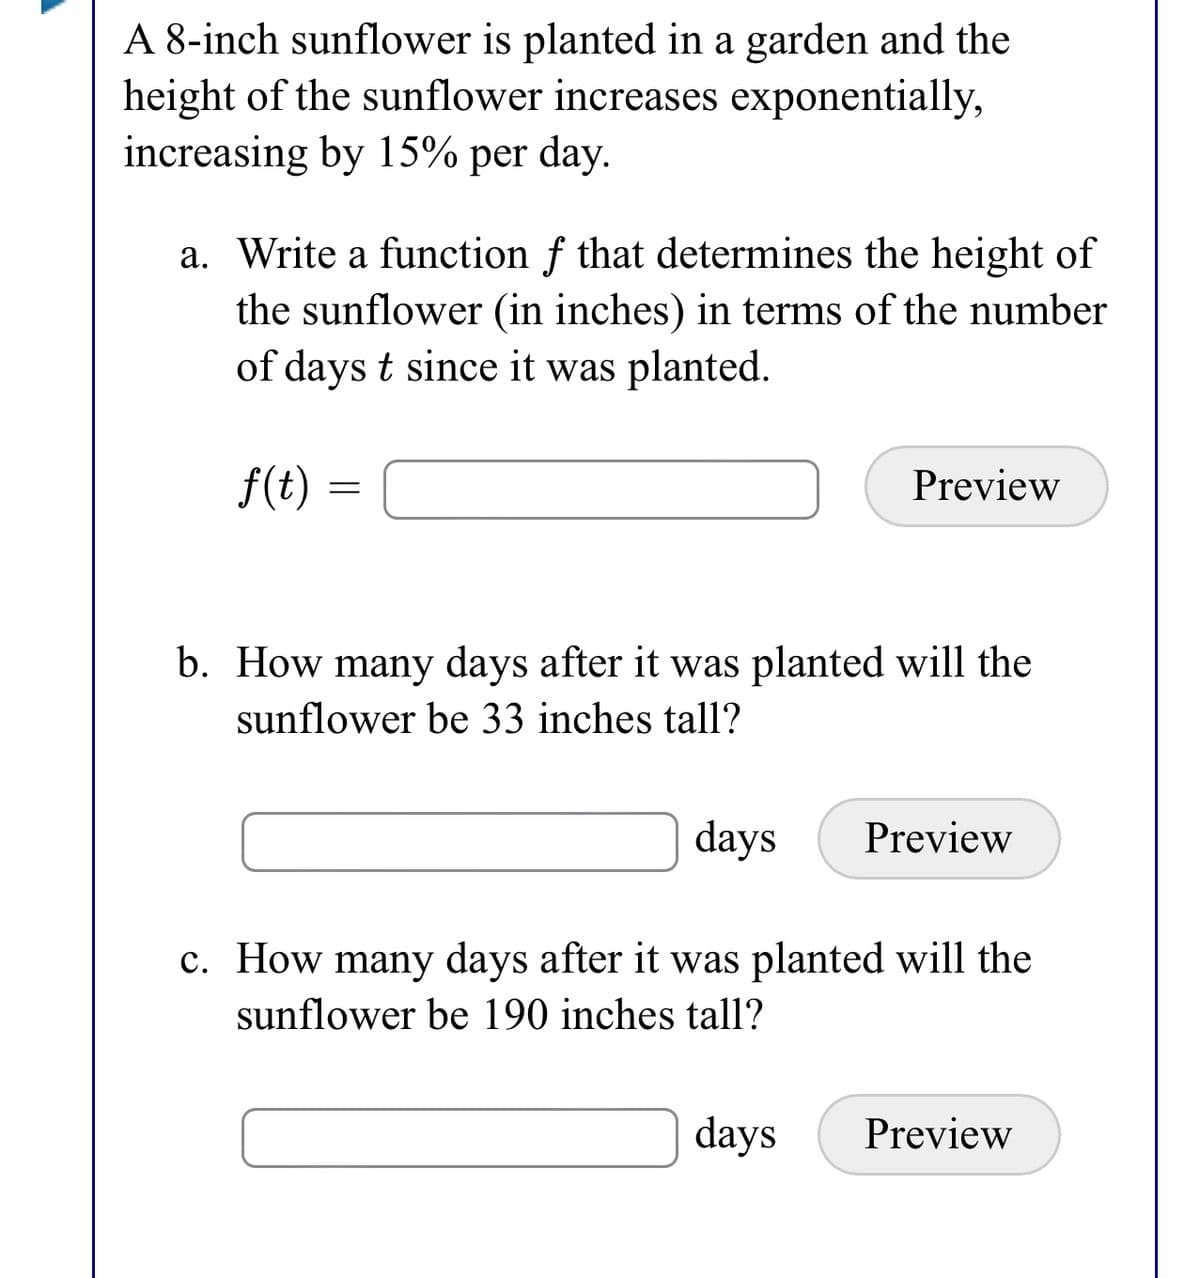 A 8-inch sunflower is planted in a garden and the
height of the sunflower increases exponentially,
increasing by 15% per day.
a. Write a function f that determines the height of
the sunflower (in inches) in terms of the number
of days t since it was planted.
f(t)
Preview
b. How many days after it was planted will the
sunflower be 33 inches tall?
days
Preview
c. How many days after it was planted will the
sunflower be 190 inches tall?
days
Preview
